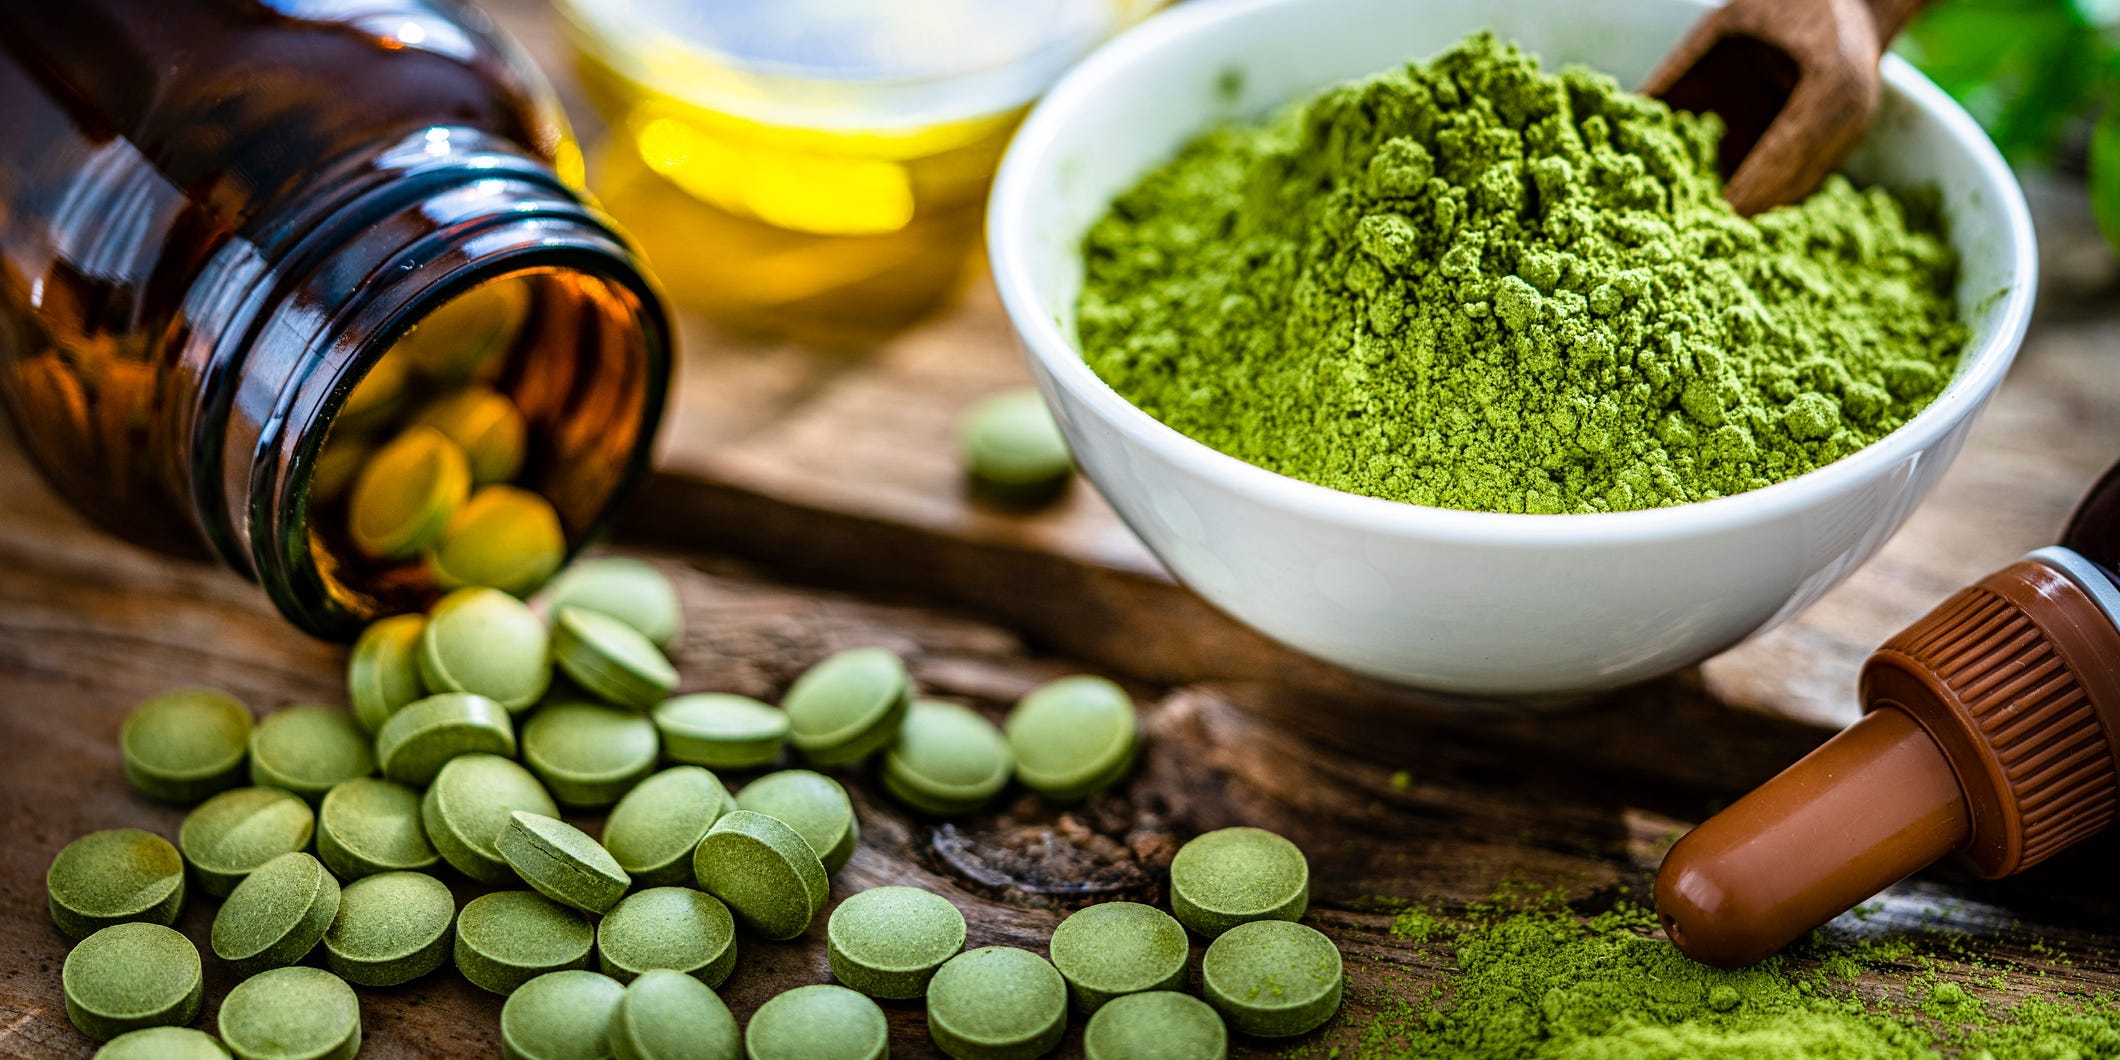 Image of moringa capsules, powder, and oil spread across a wood table.